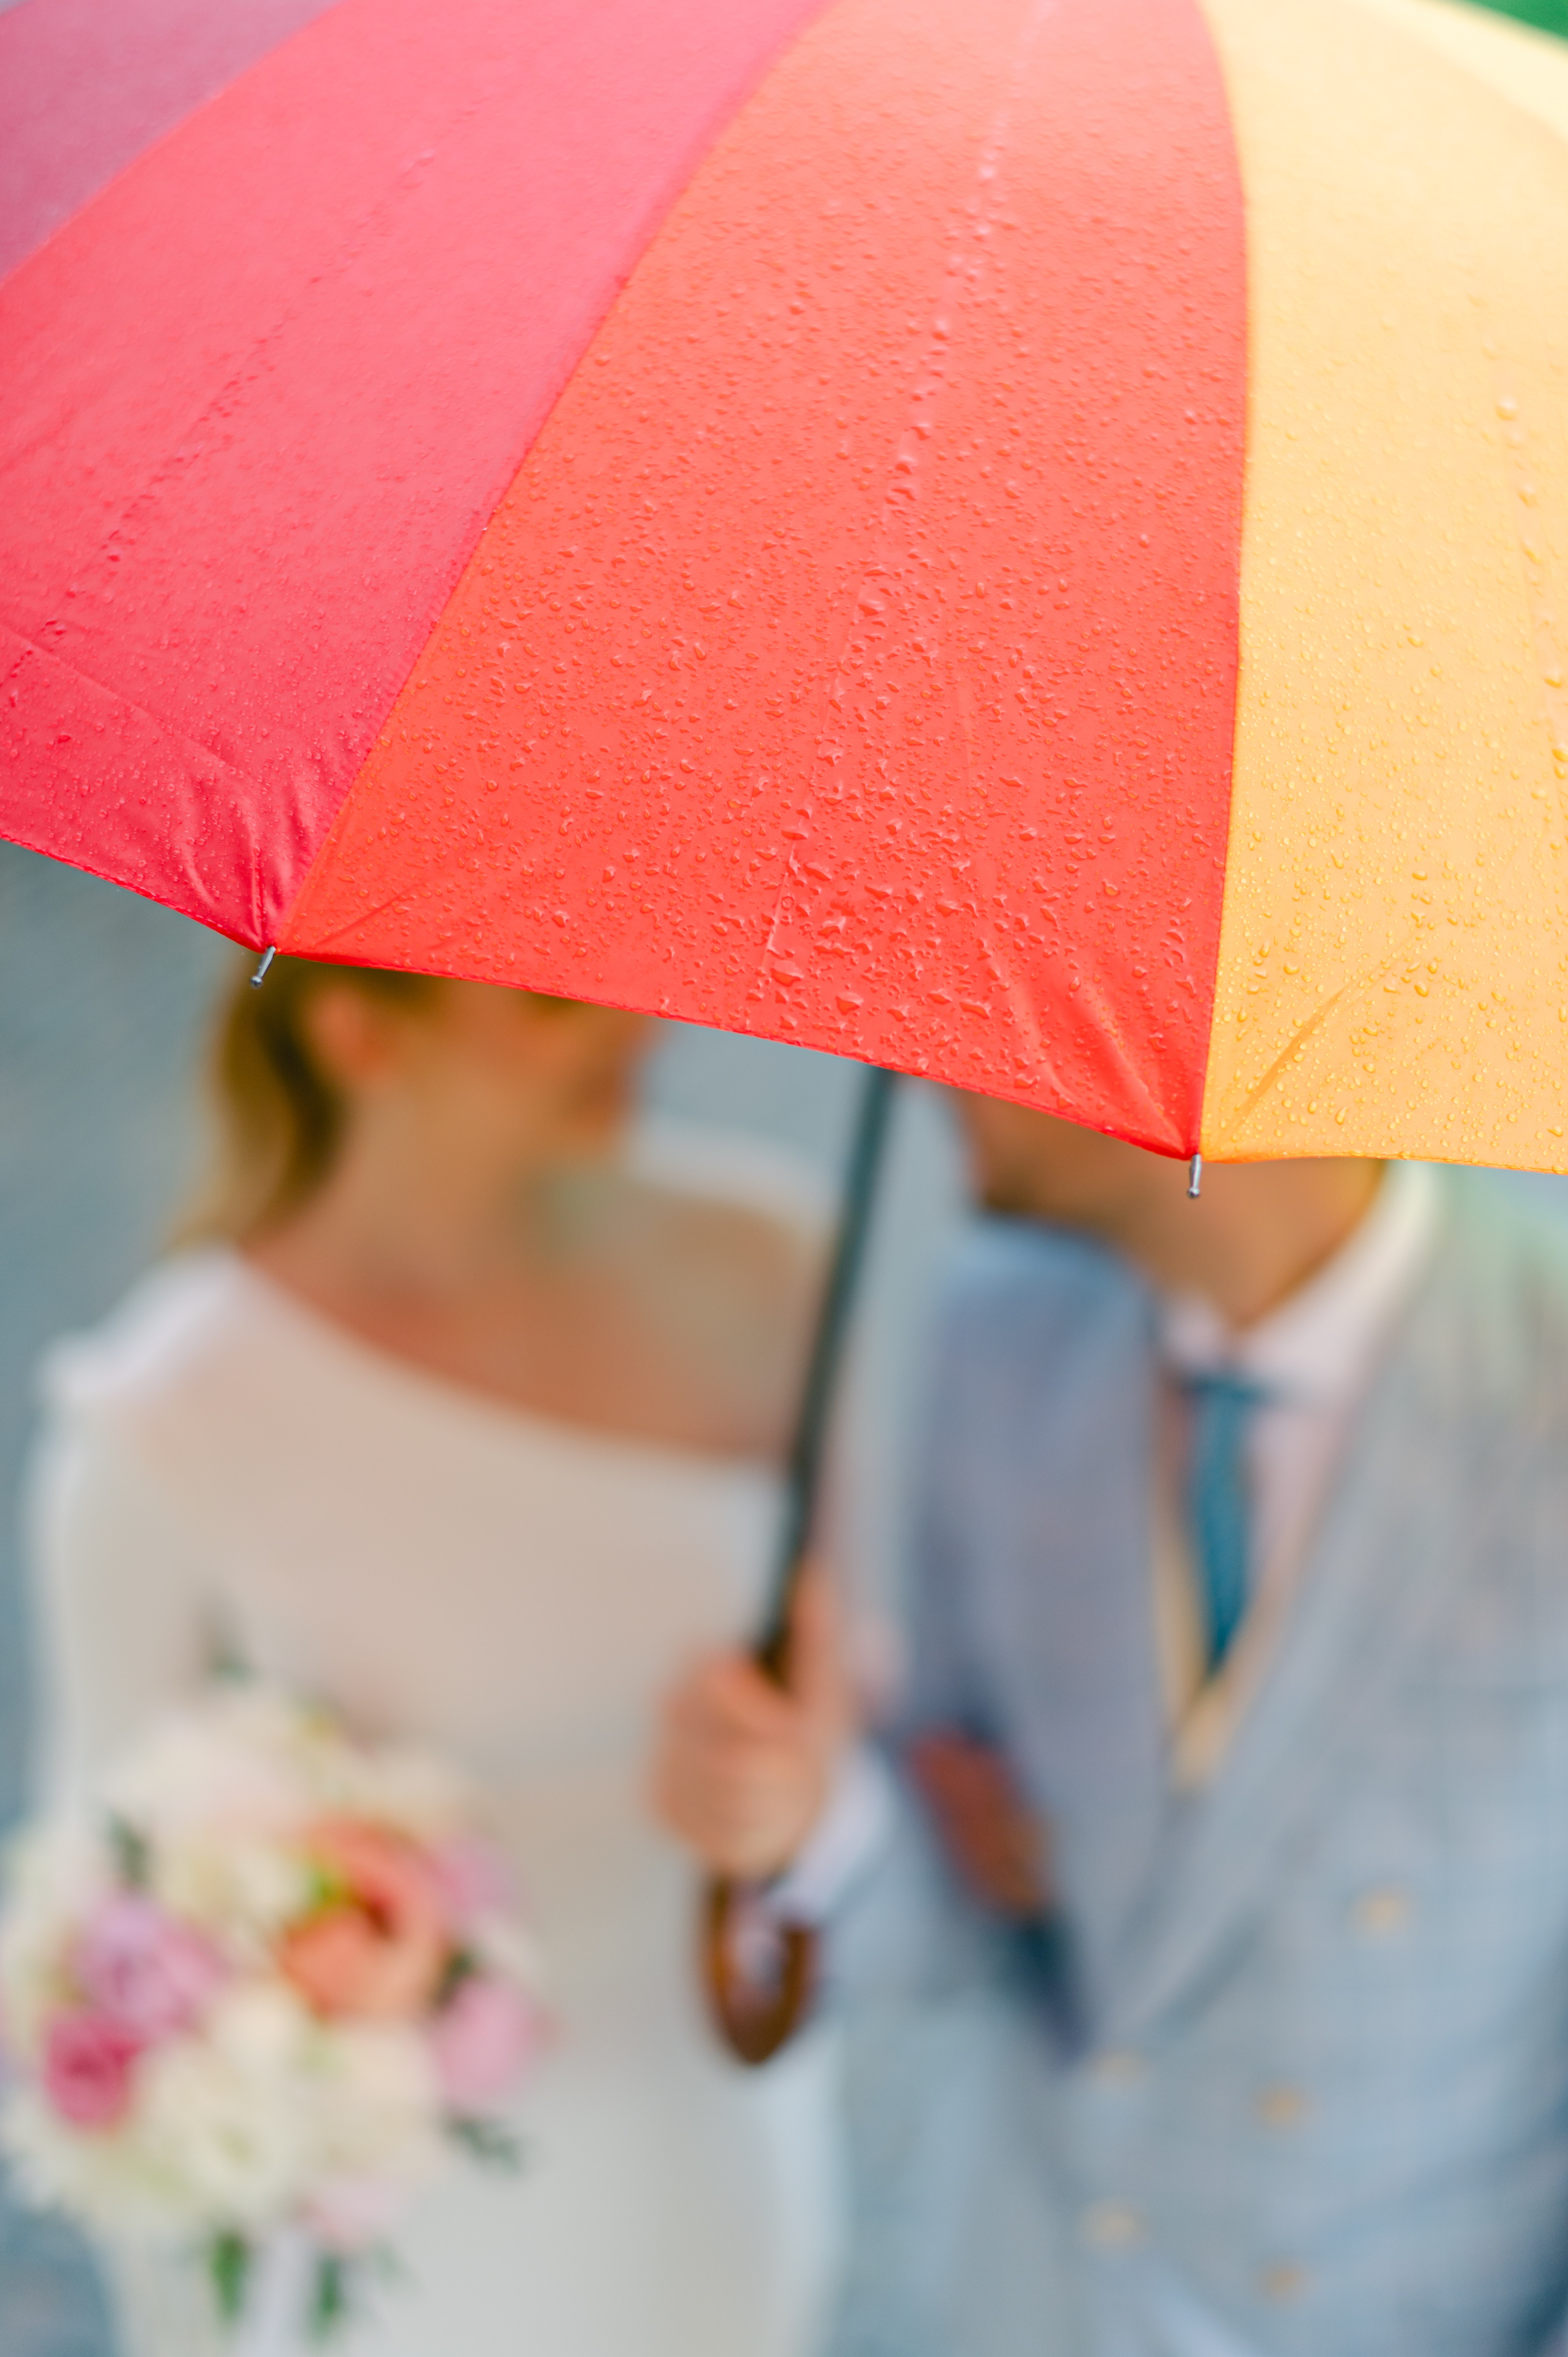 The old saying goes Rain is good luck on your wedding day We say Let's avoid hurricane season!" When is the best time to plan a wedding in Mexico and the Caribbean?